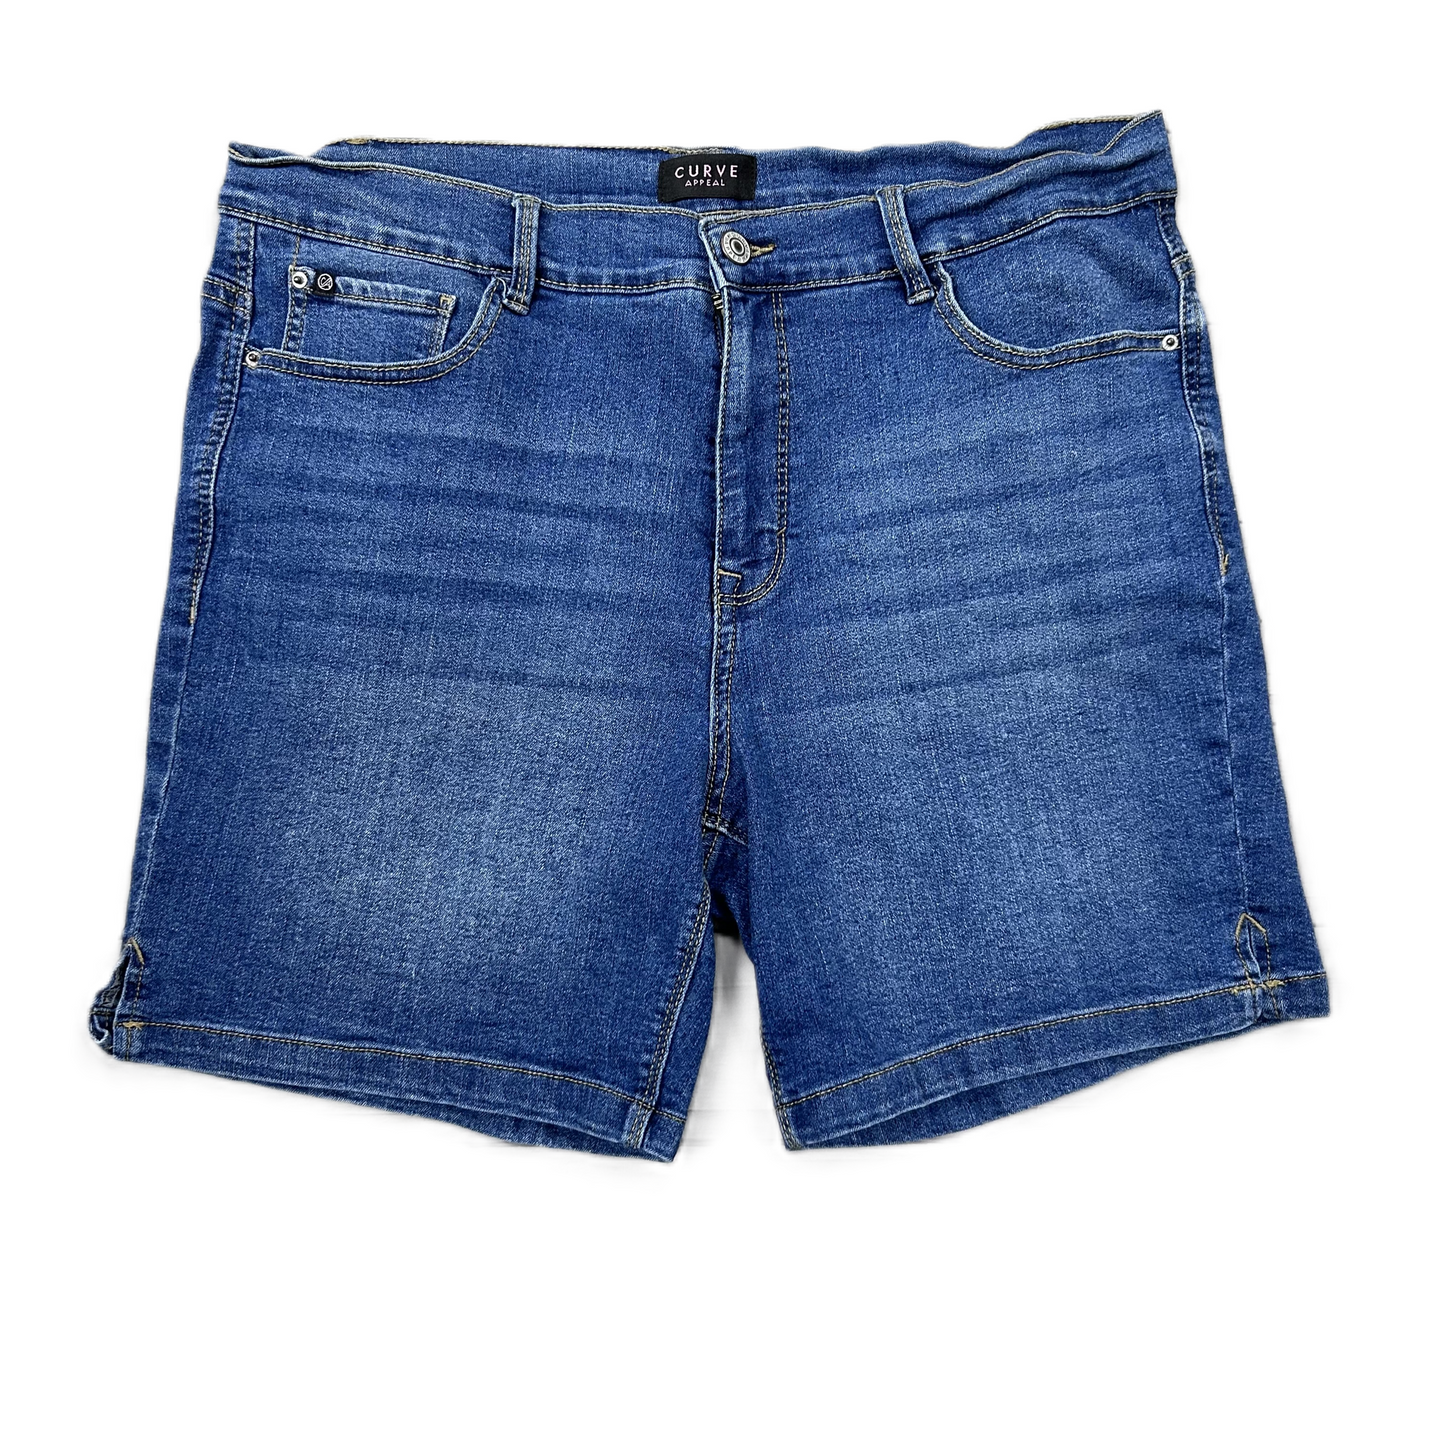 Shorts By Curve Appeal  Size: 14